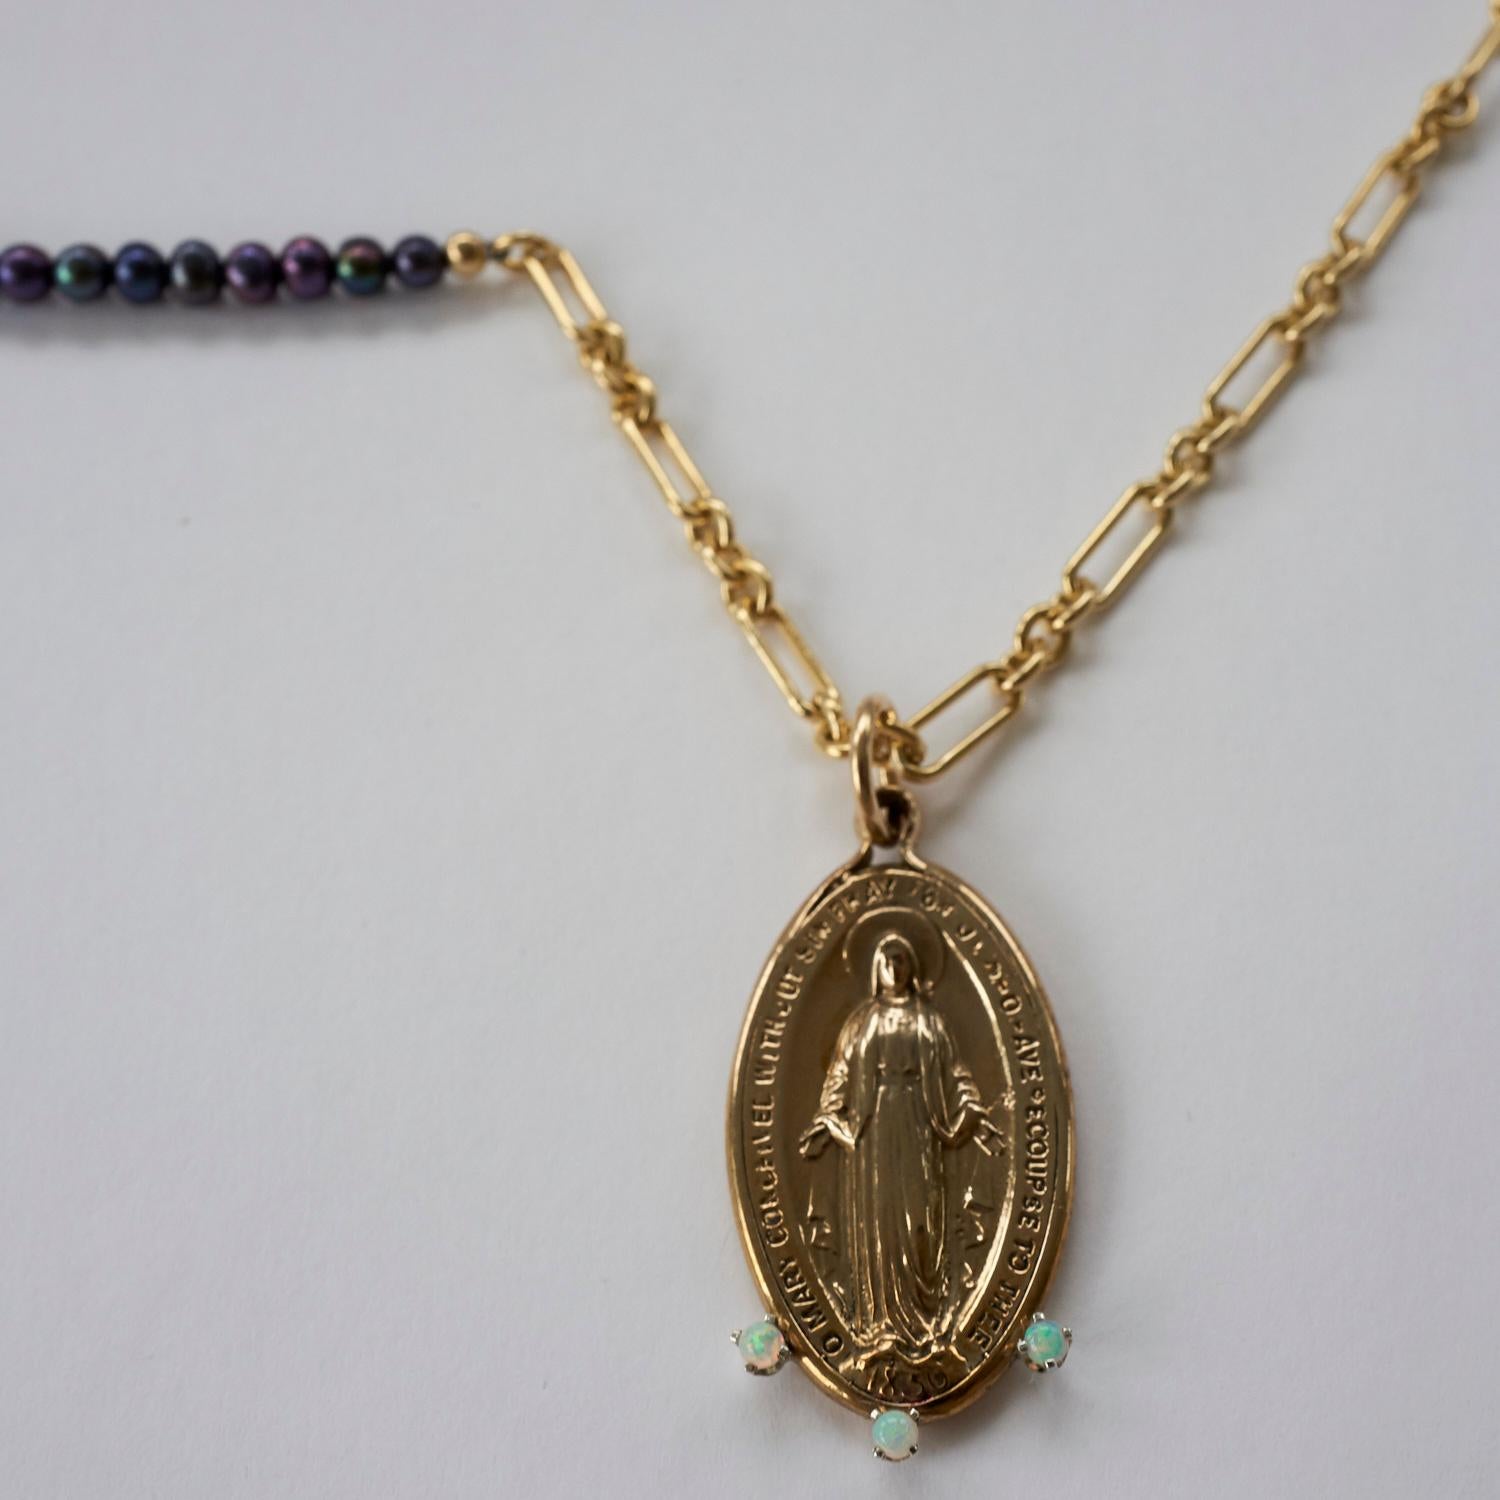 Brilliant Cut Black Bead Chain Necklace Medal Egyptian Oval Virgin Mary Opals J Dauphin For Sale